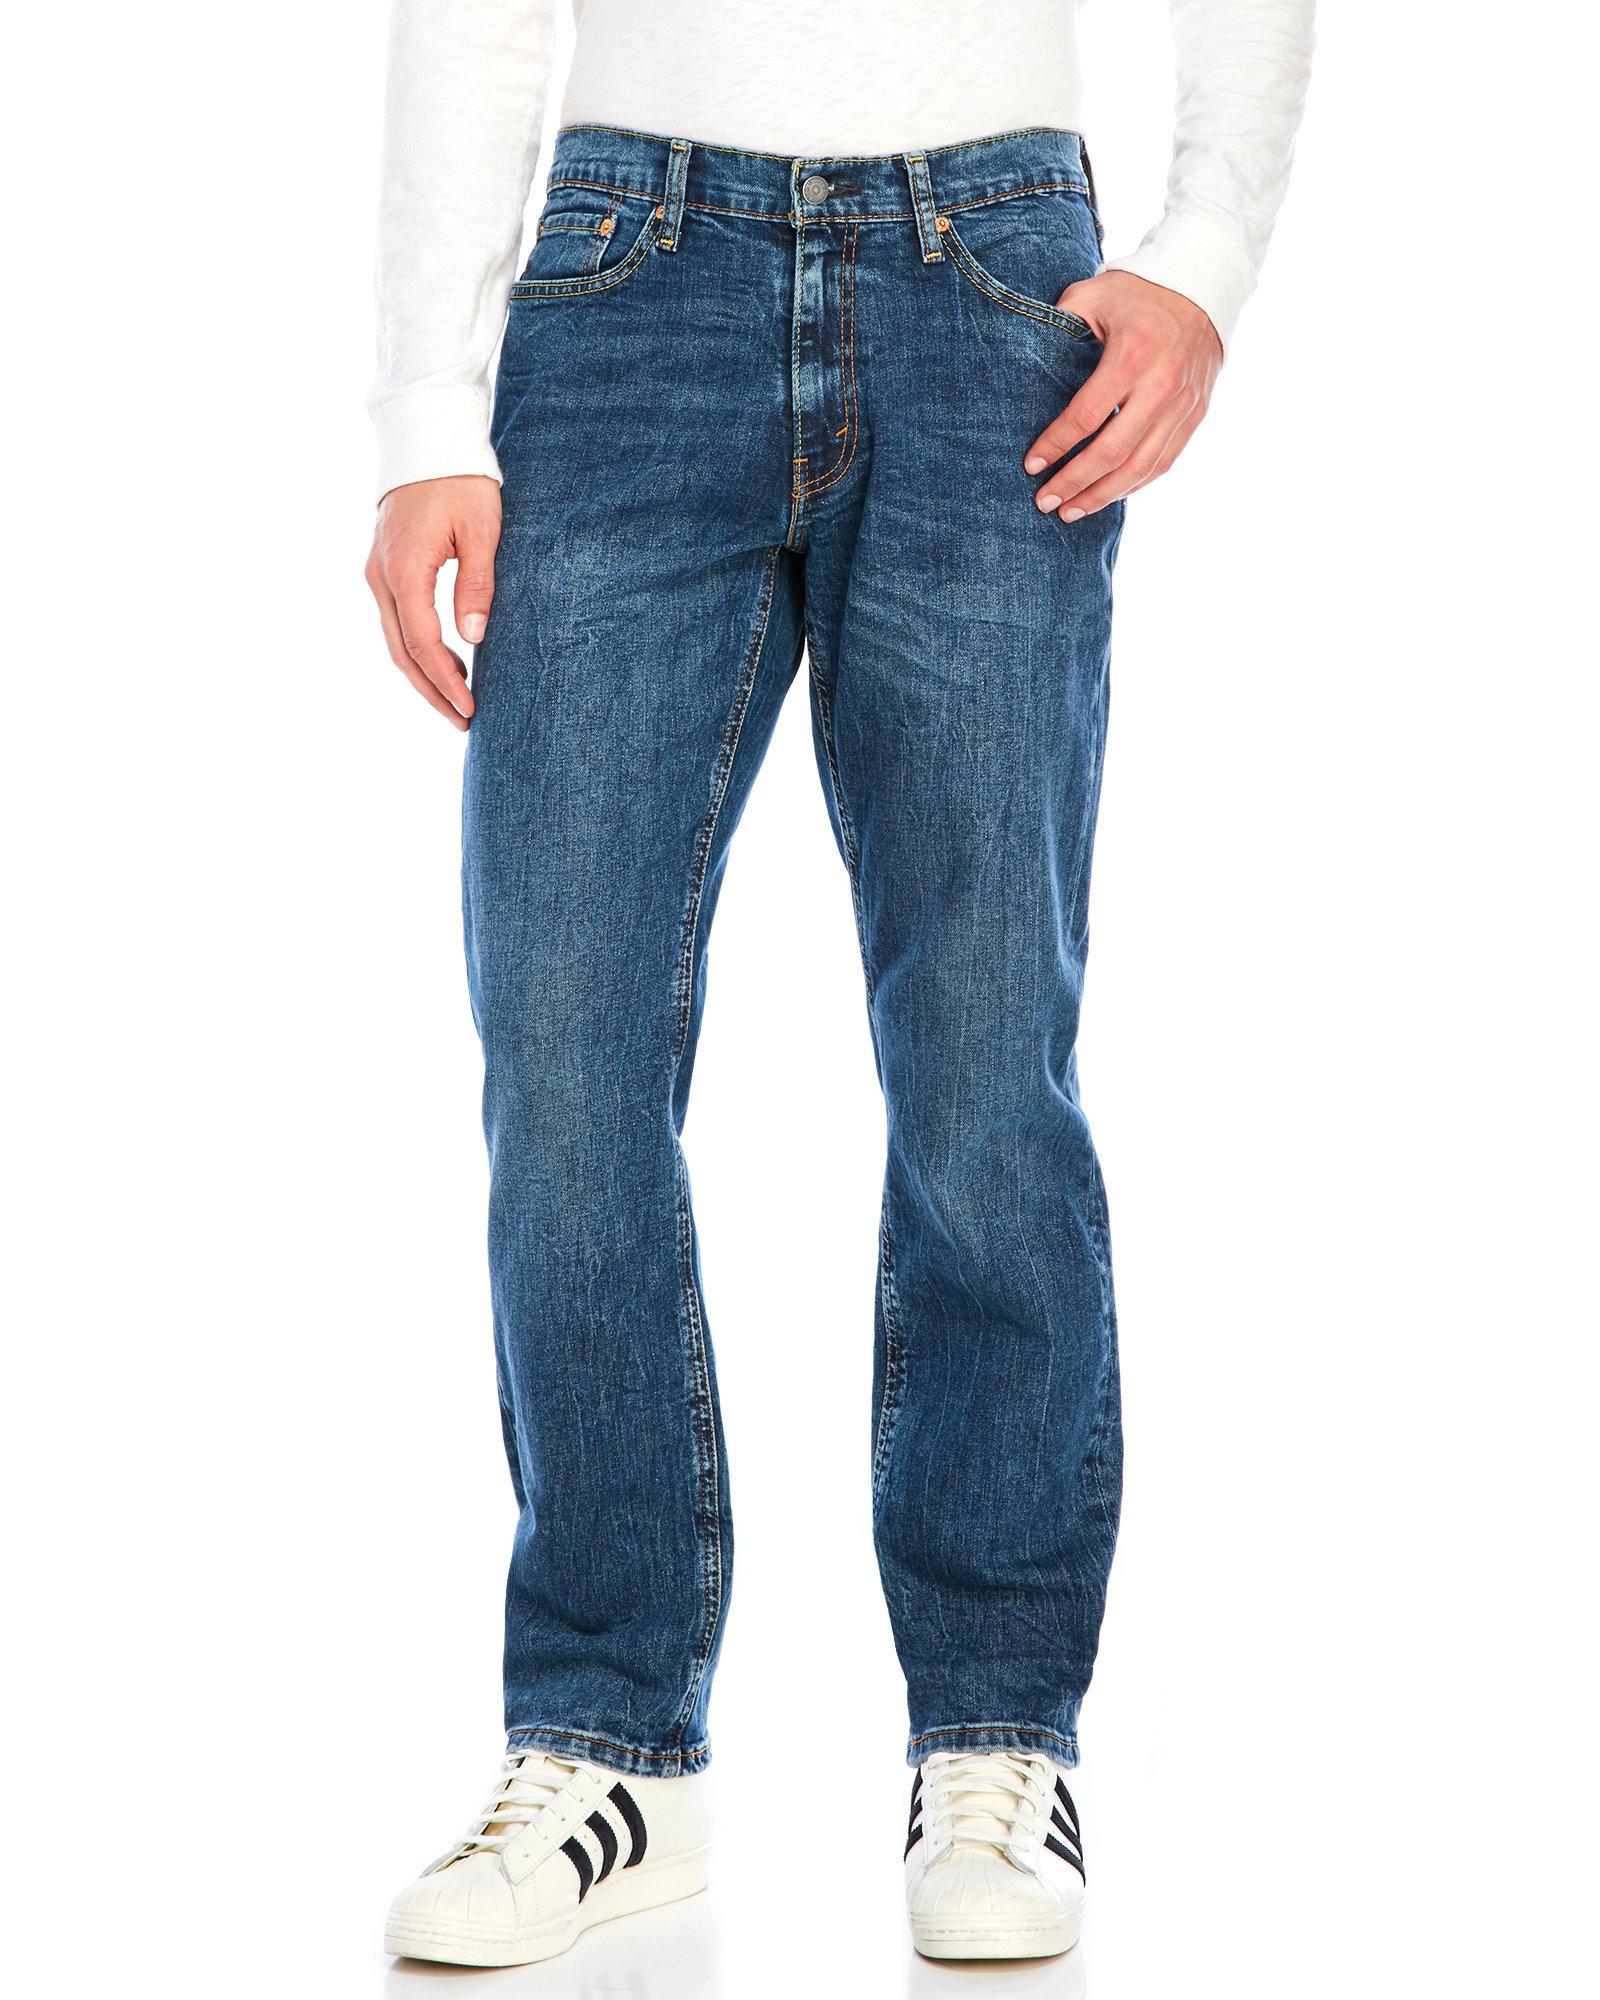 levis 541 athletic fit stretch